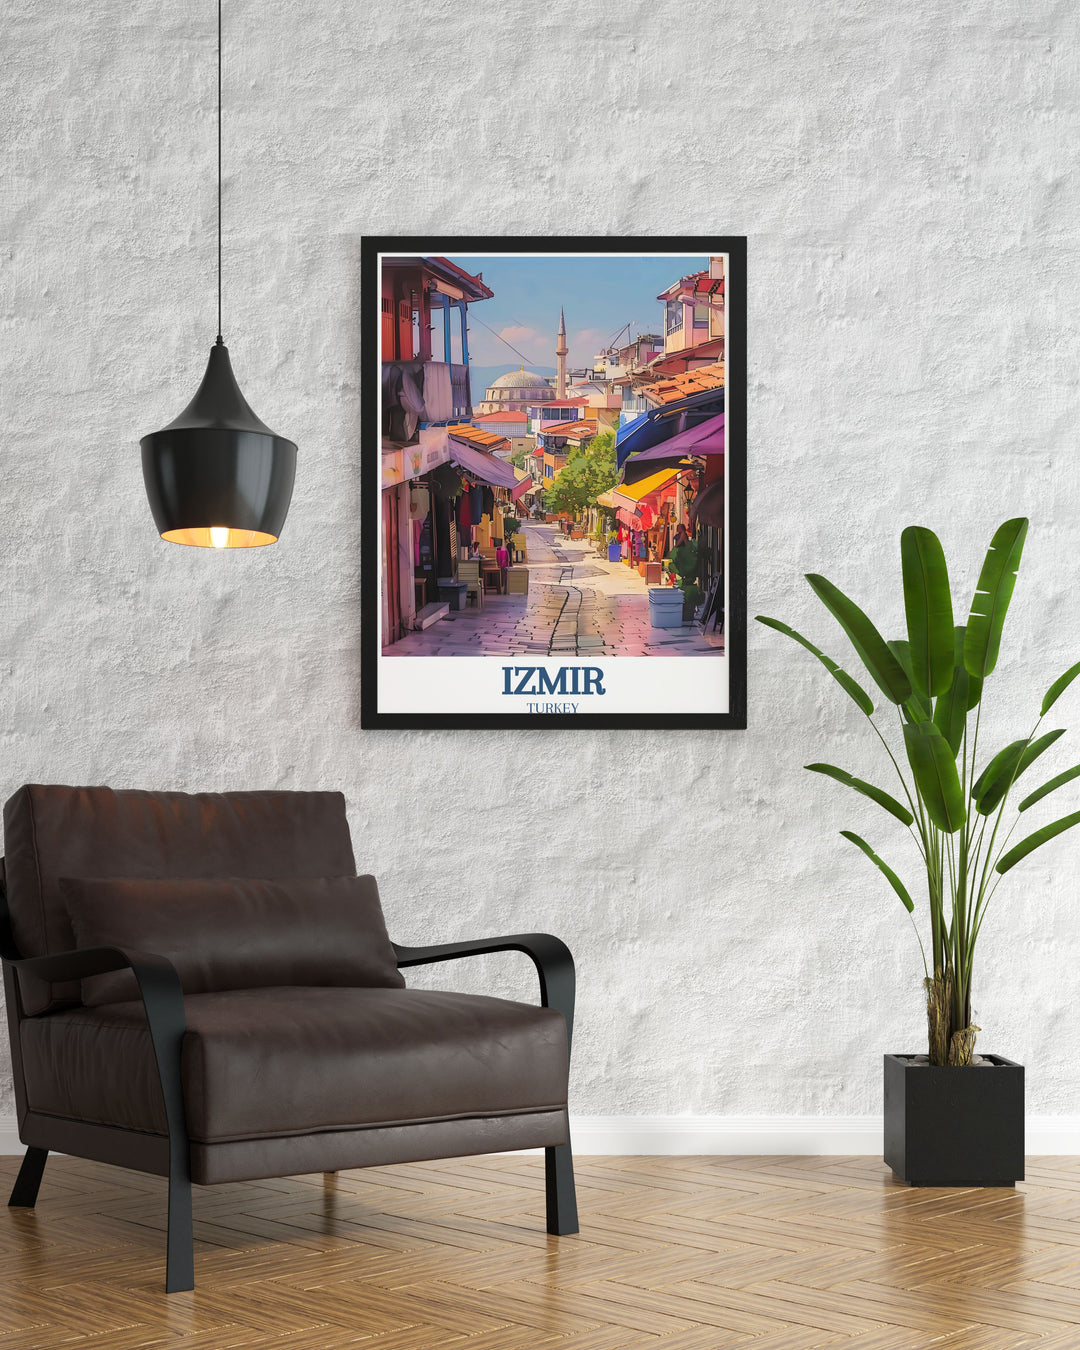 Featuring the vibrant Kemeralti Bazaar and the tranquil Başdurak Mosque, this poster brings the essence of Izmirs cultural heritage into your living space.